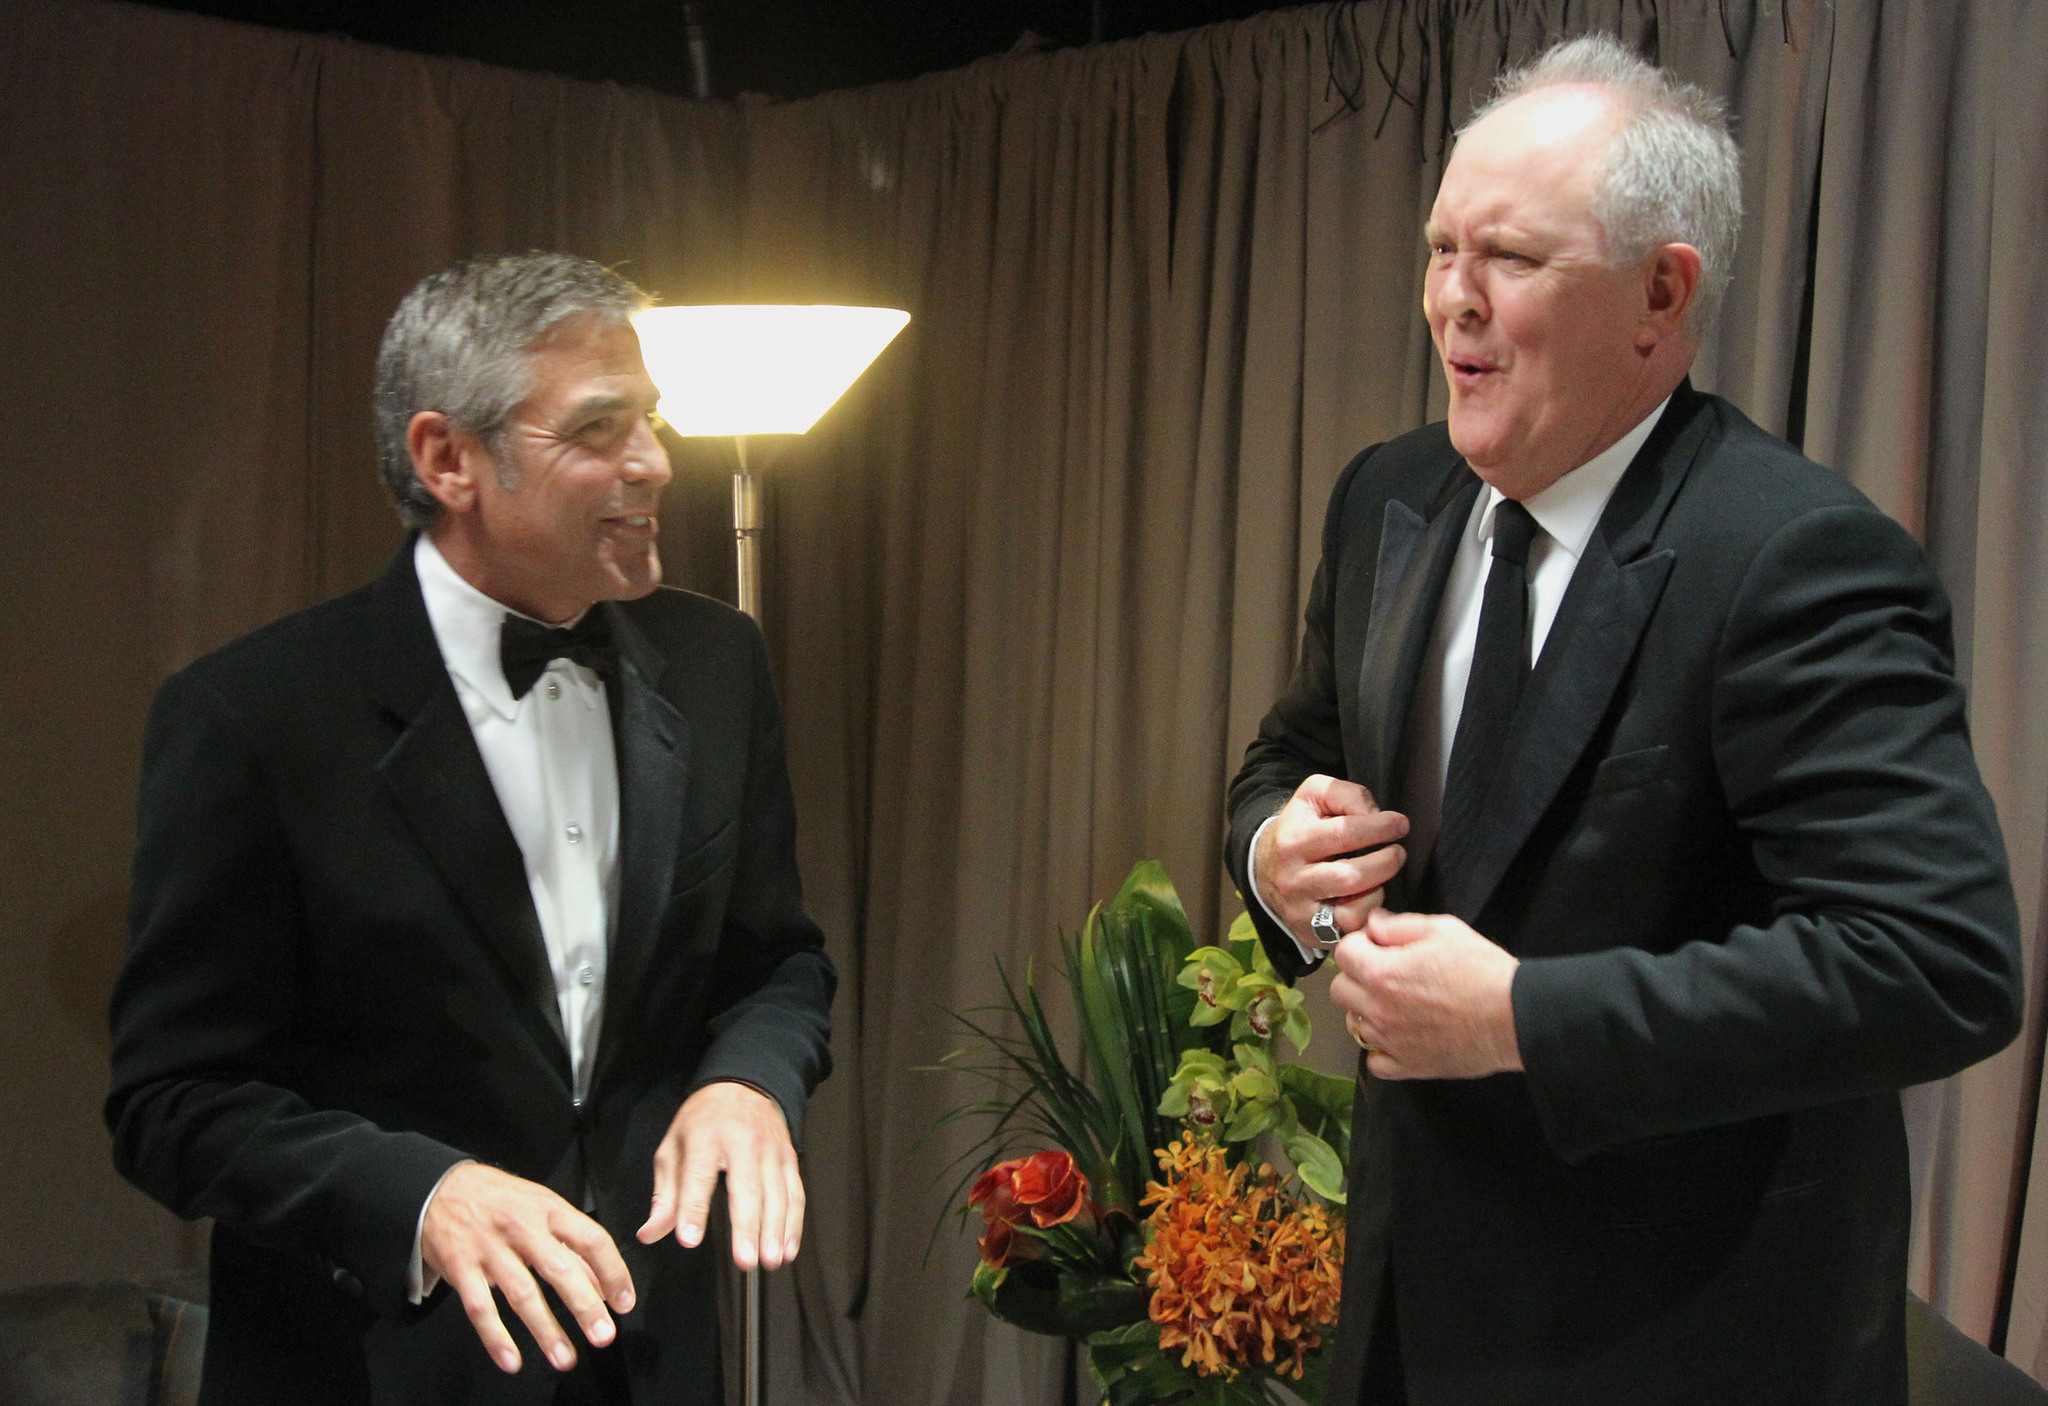 George Clooney and John Lithgow